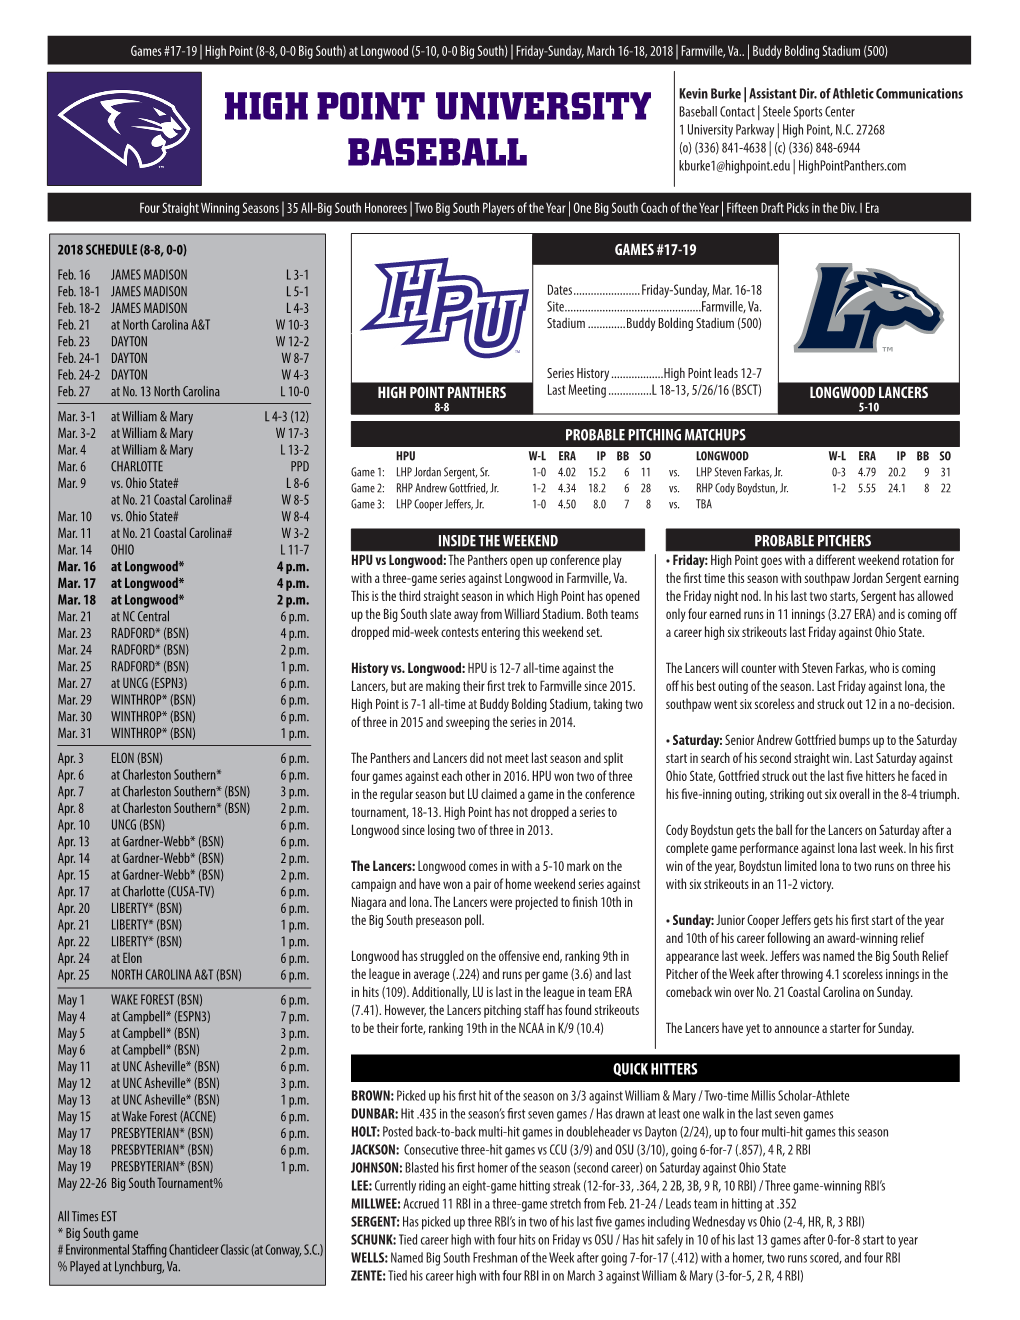 HIGH POINT UNIVERSITY Baseball Contact | Steele Sports Center 1 University Parkway | High Point, N.C